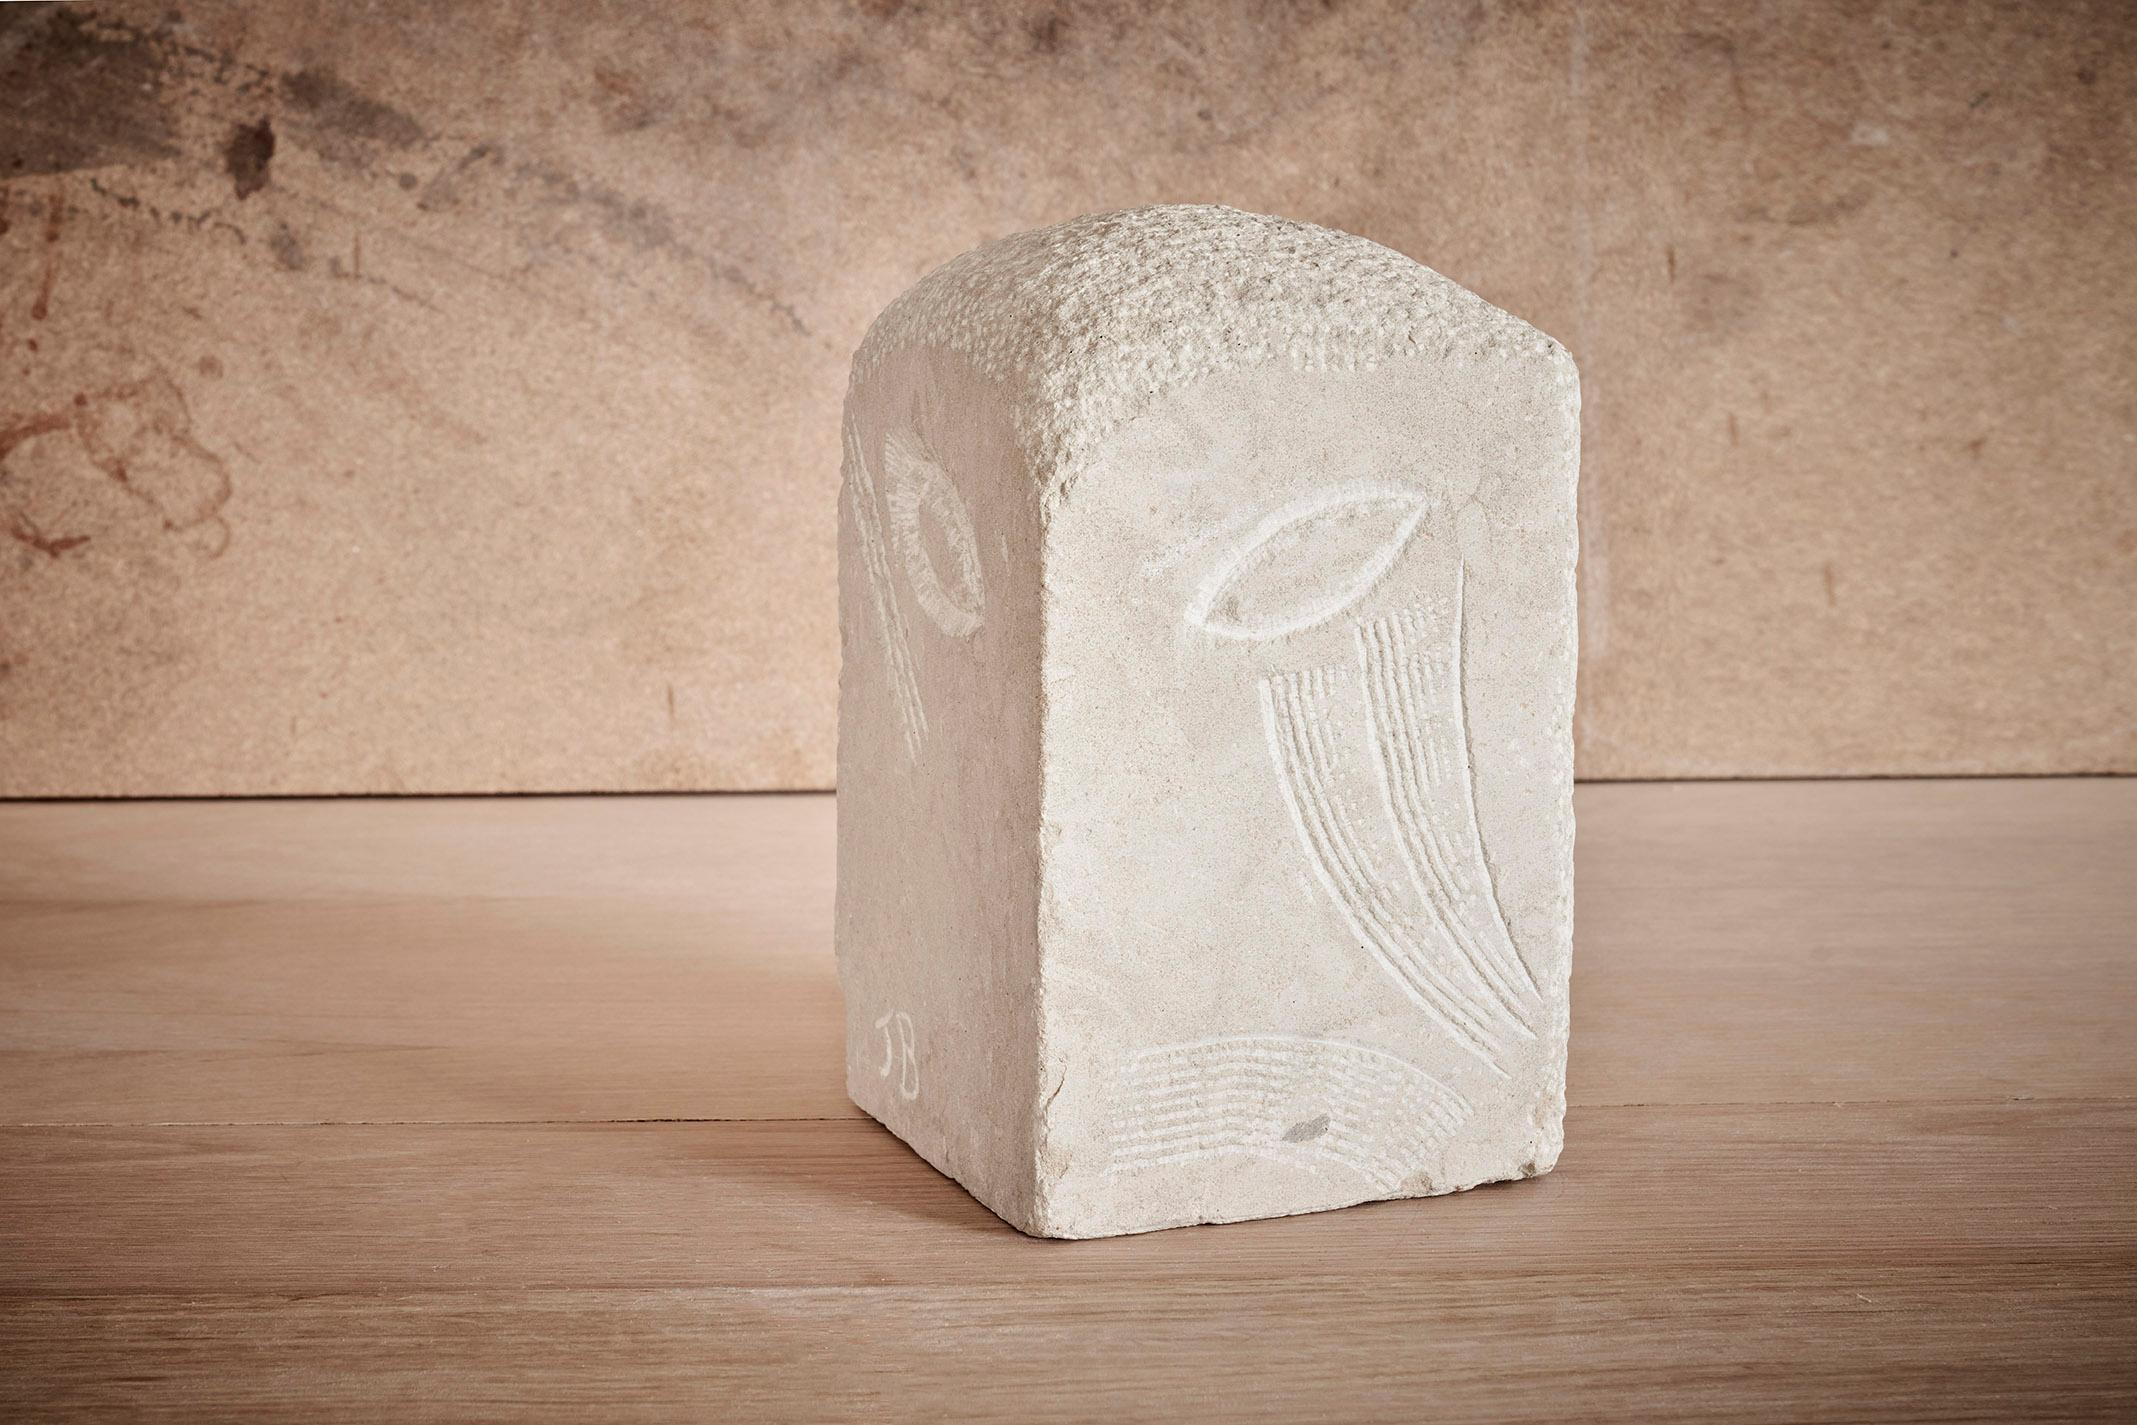 Unique stone sculpture Las 4 Caras by Jean-Baptiste Van den Heede
Signed, unique
Dimensions: 16 x 16 x 27 cm
Materials: stone

Jean-Baptiste Van den Heede defines himself as a cabinetmaker-designer and an artist of academic training and family